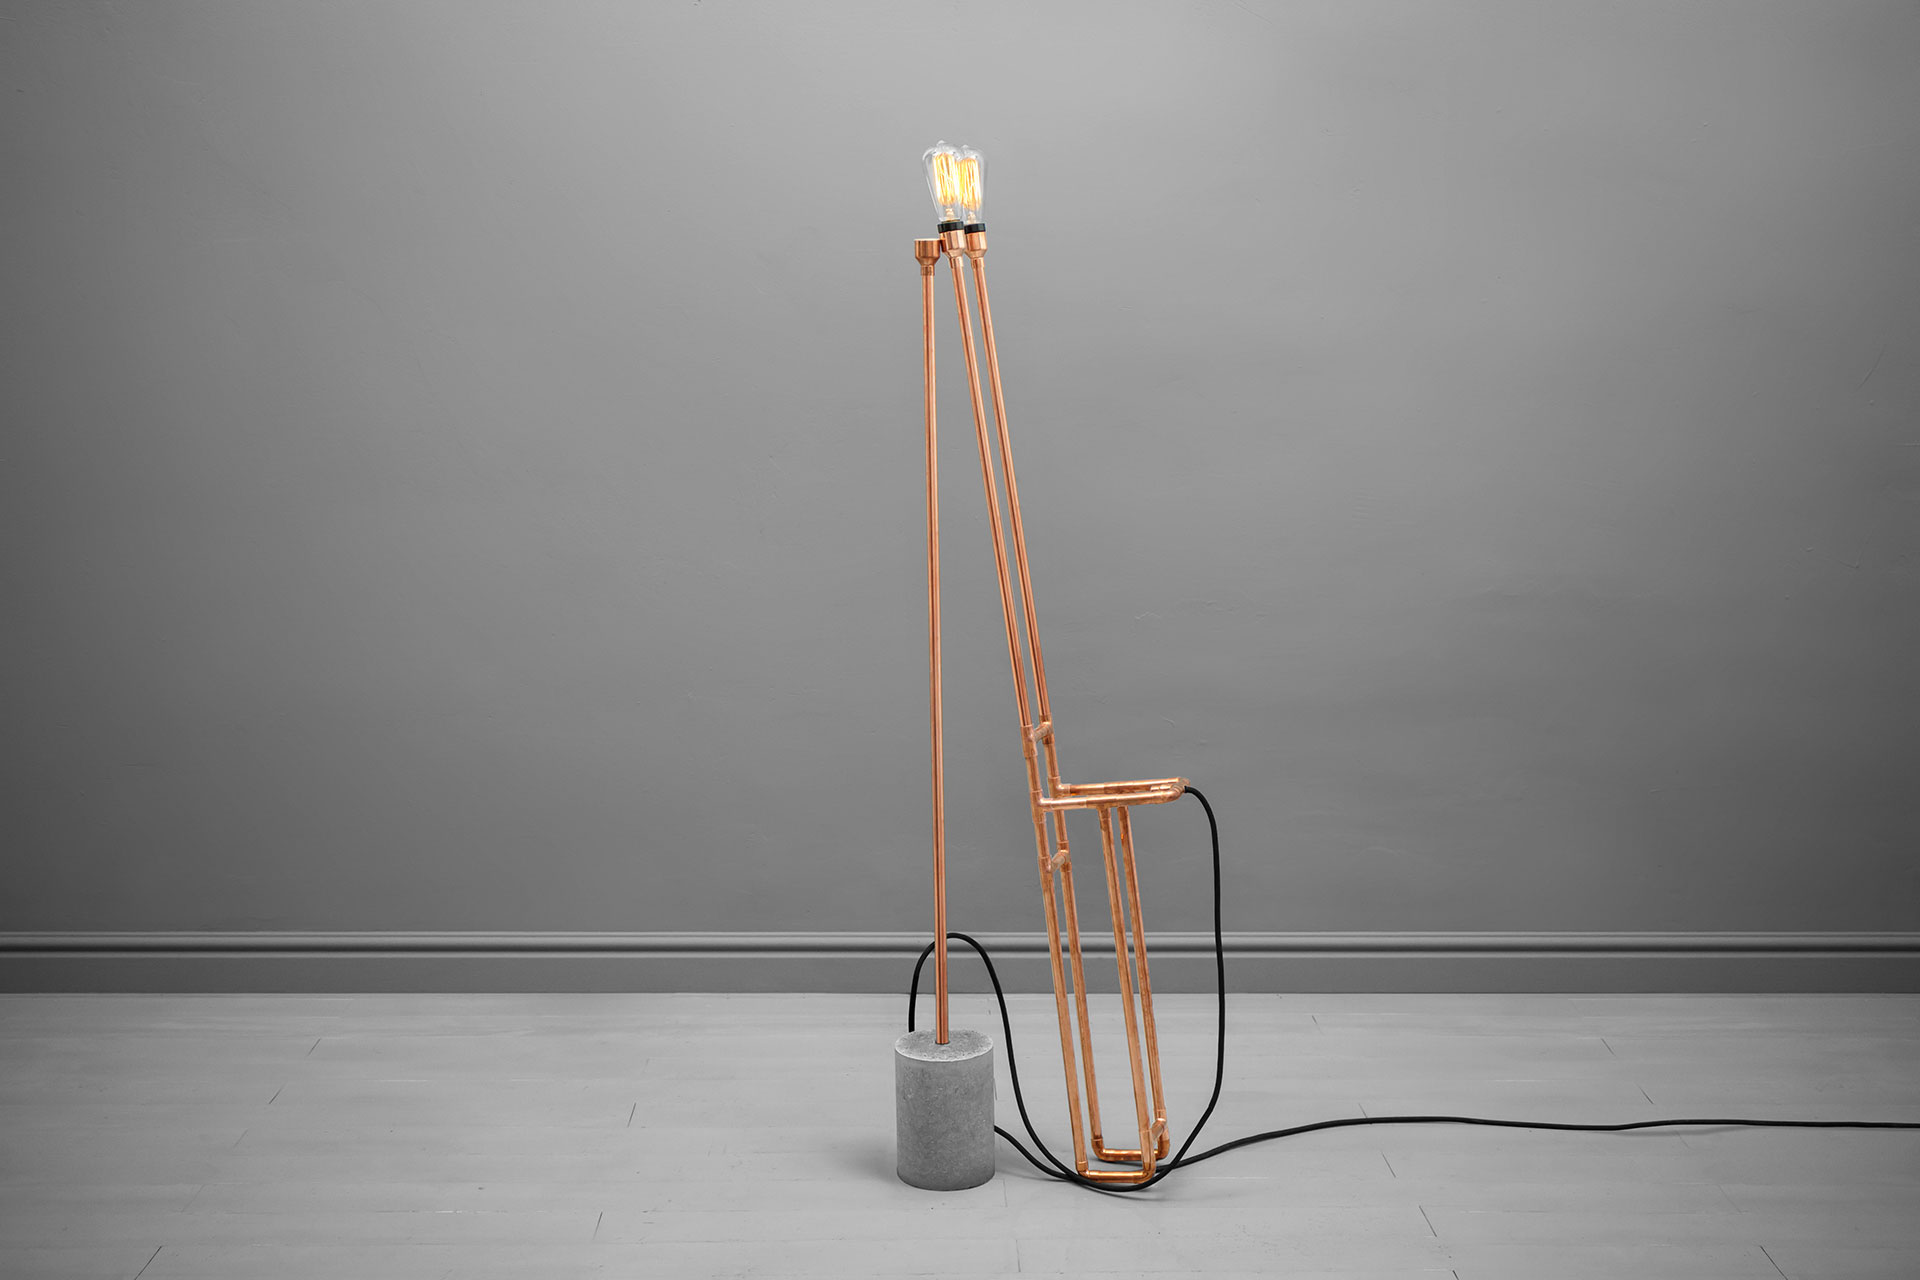 Two separate pieces of the copper floor lamp inspired by steampunk design